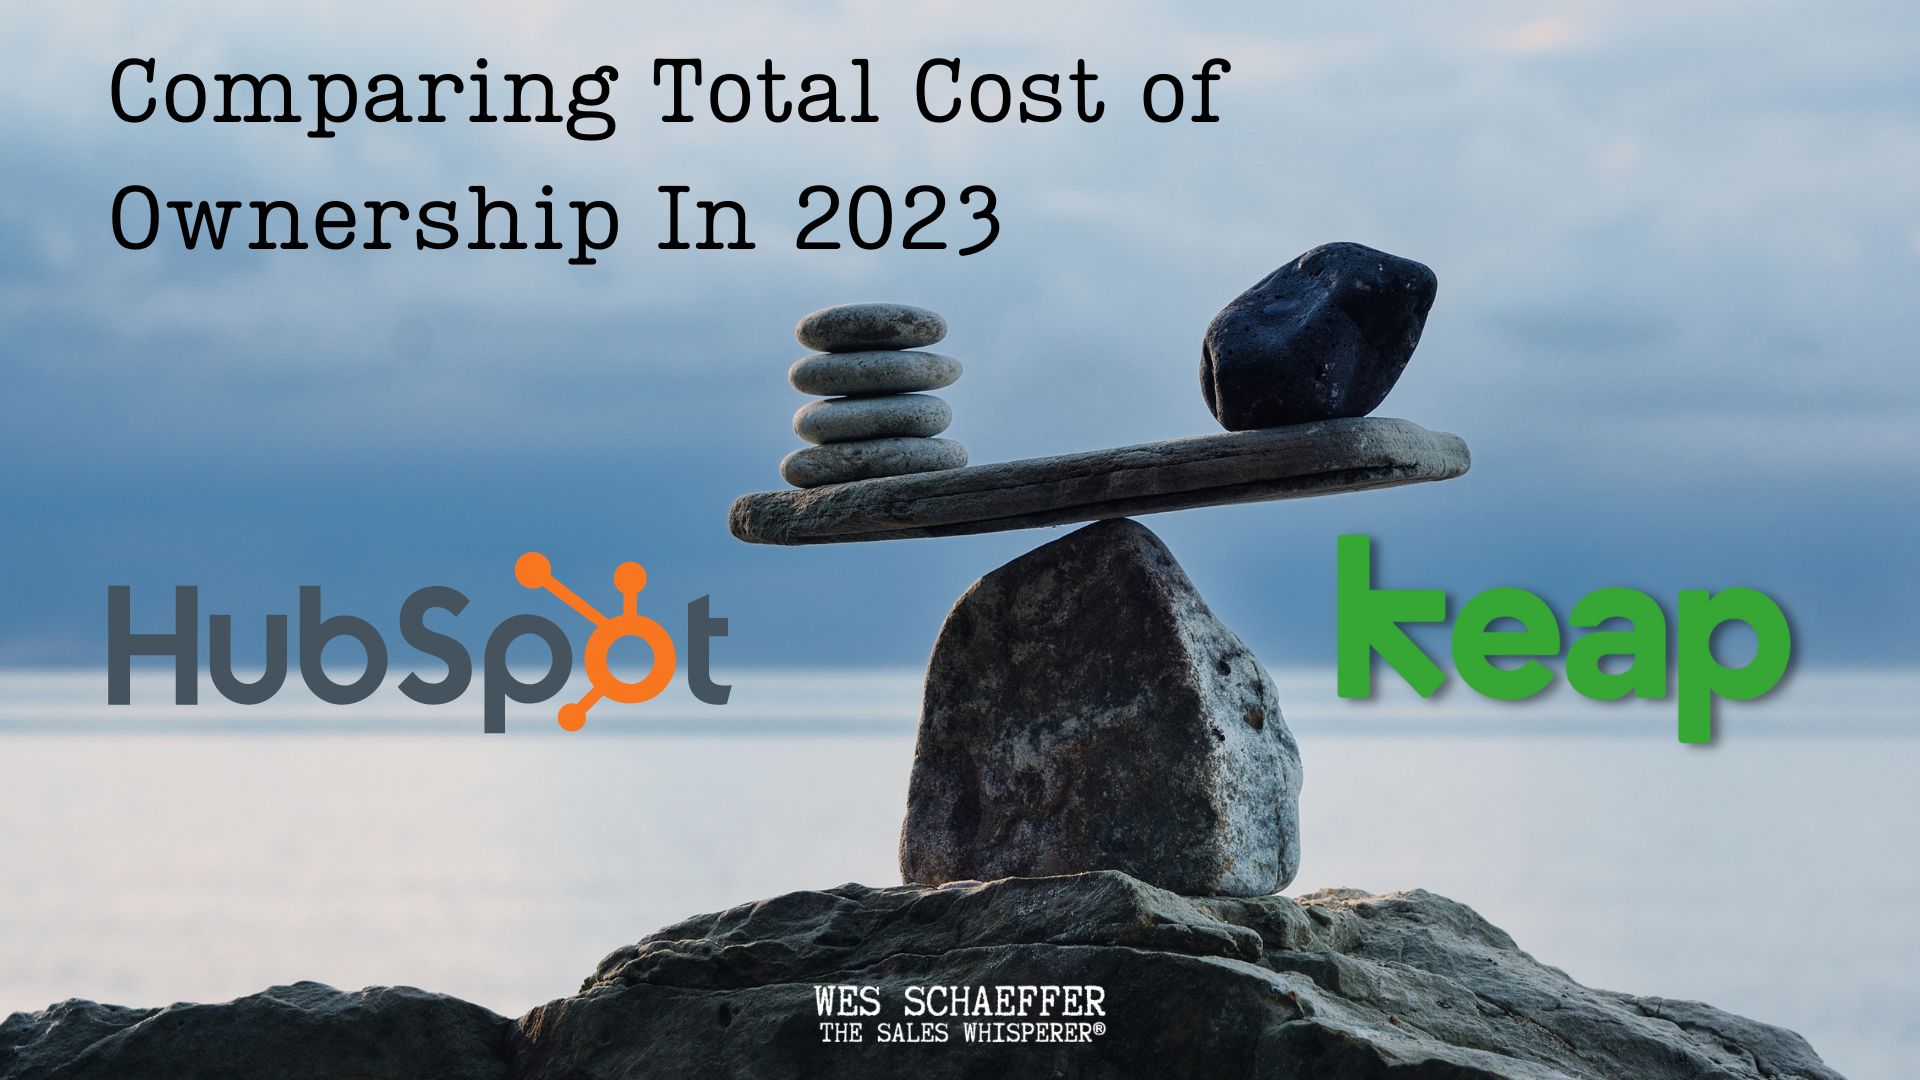 HubSpot vs Keap. Let’s compare the true cost of ownership between these CRM and marketing automation platforms.